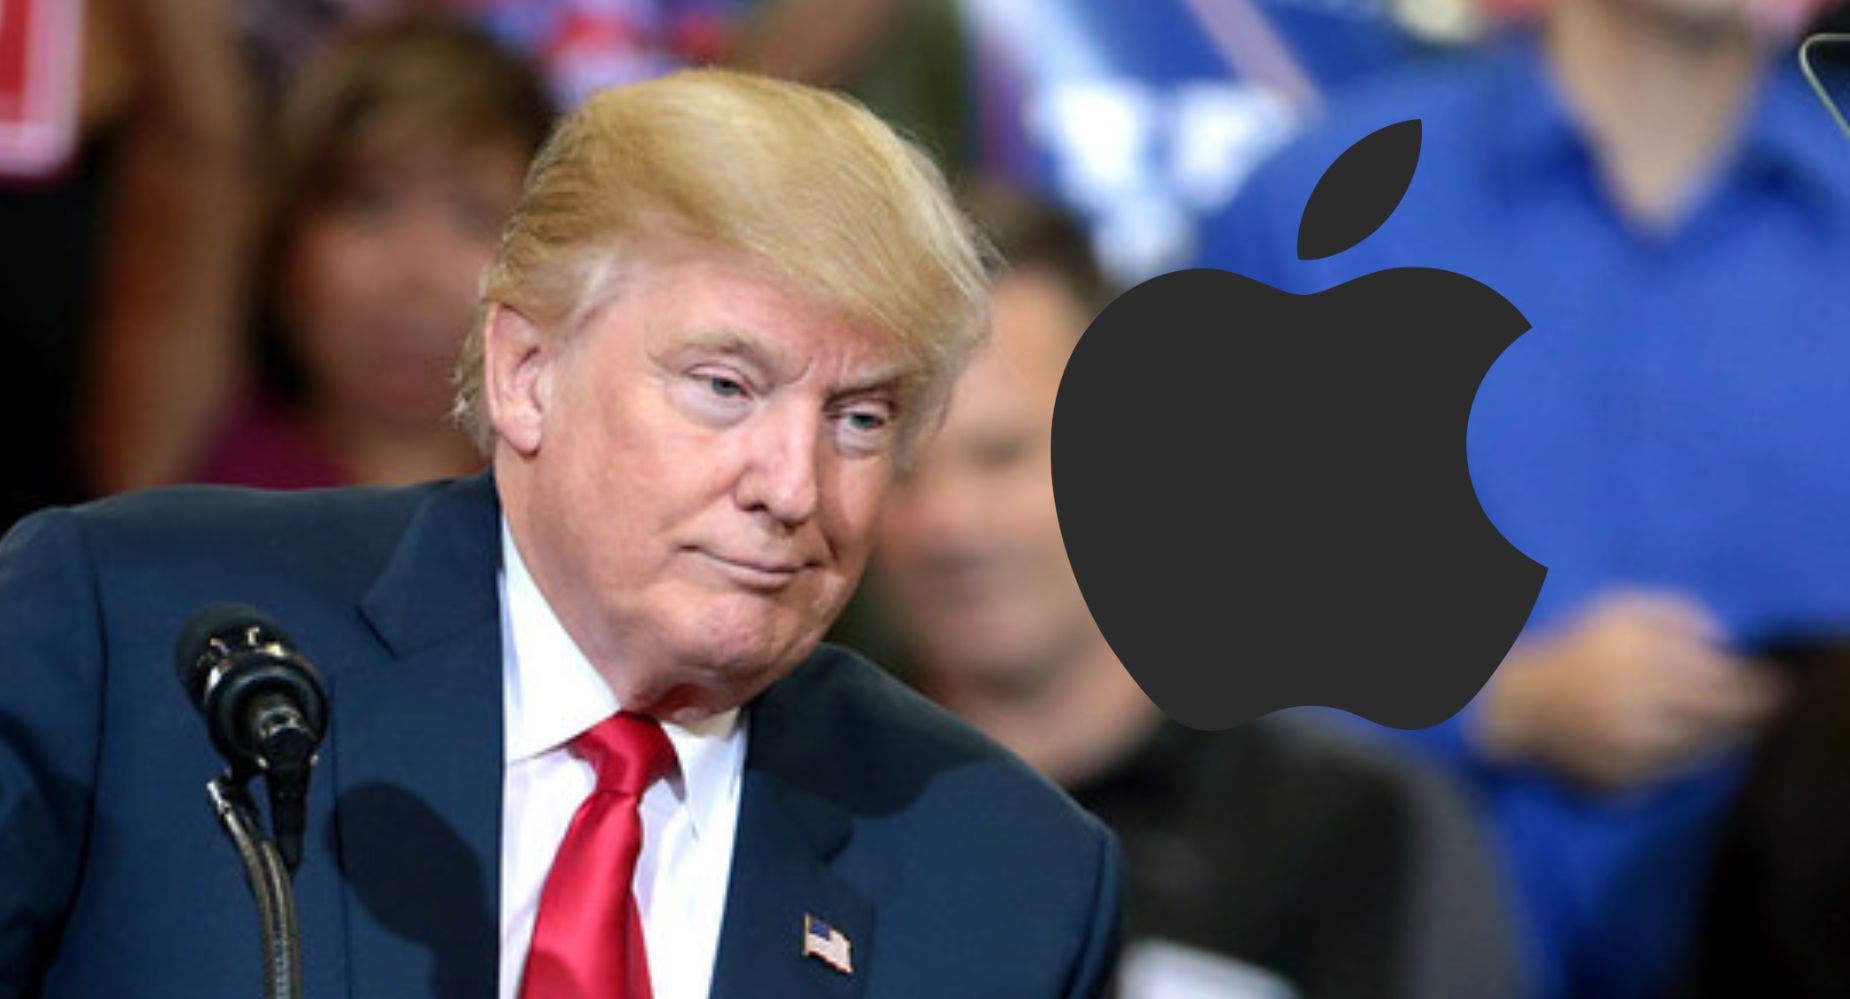 If You Invested $1,000 In Apple Stock When Donald Trump Sold, Here's How Much You Would Have Today